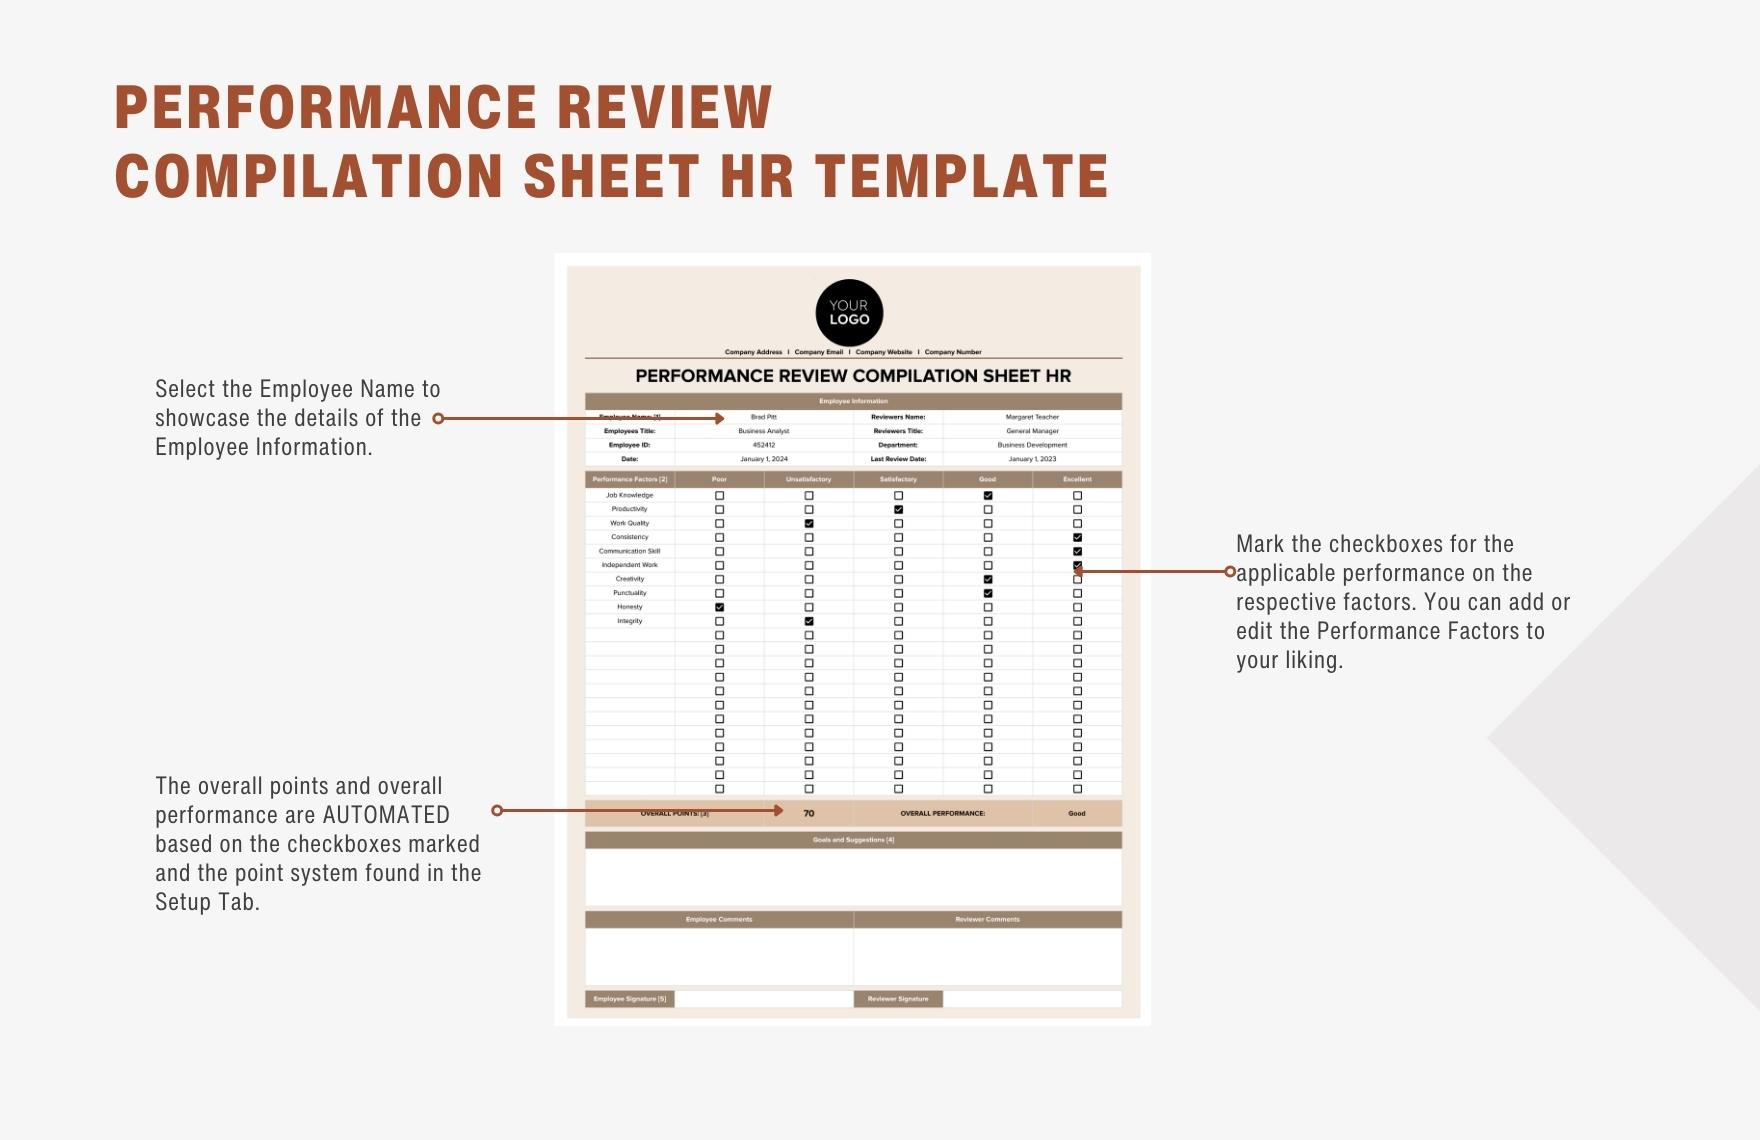 Performance Review Compilation Sheet HR Template